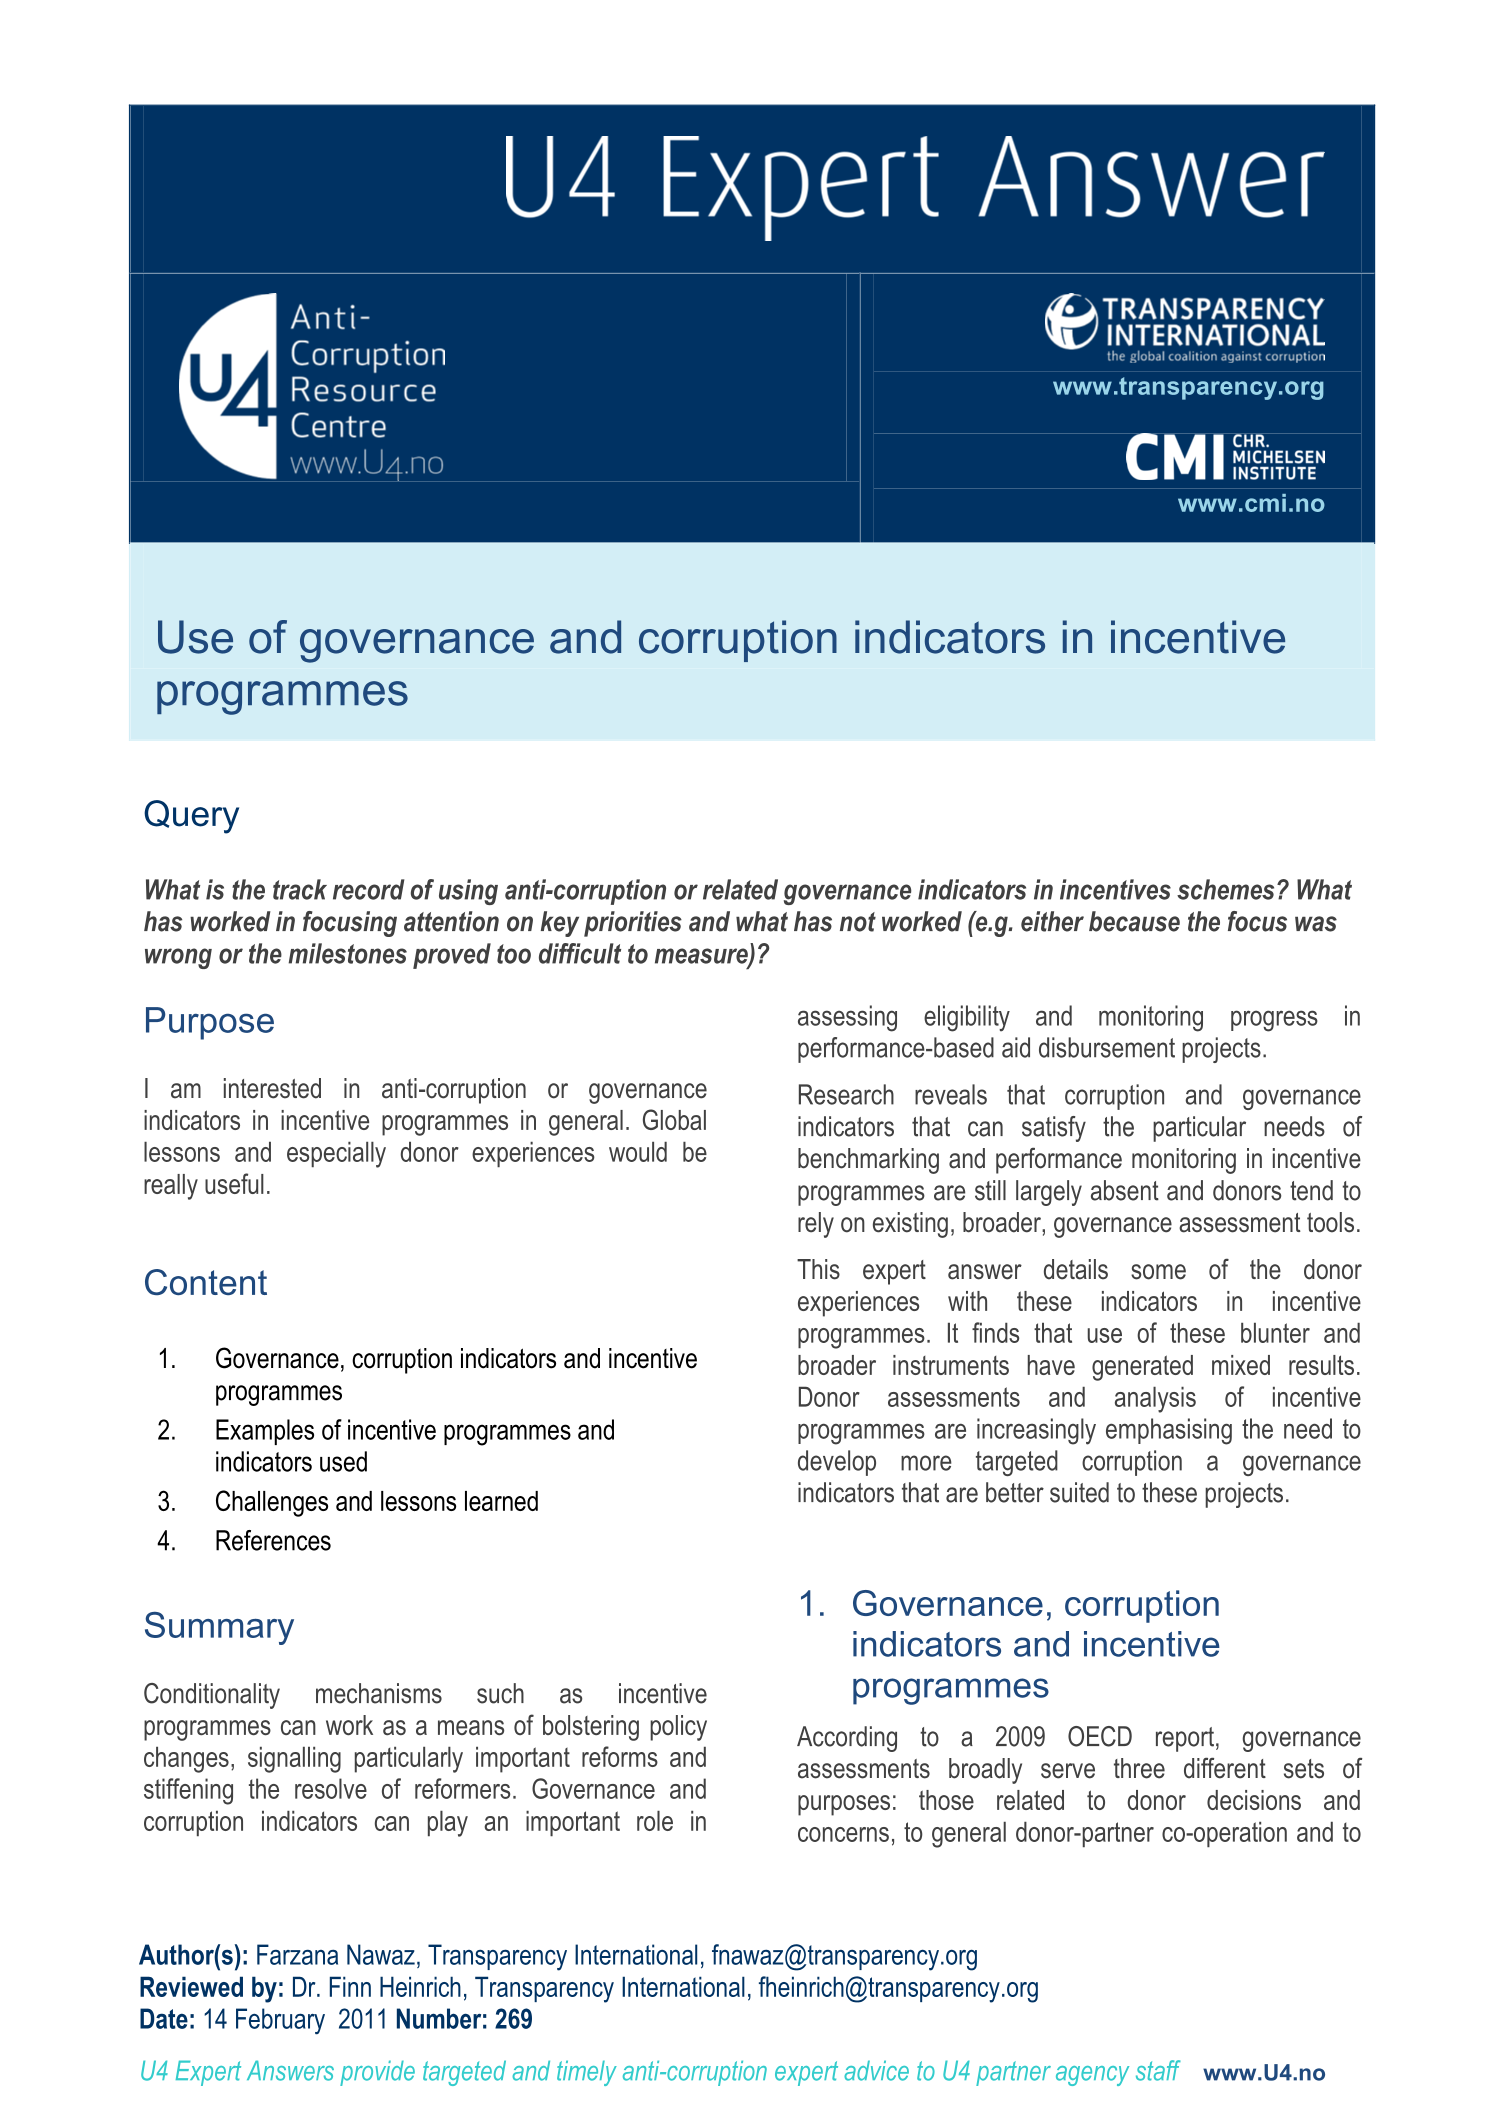 Use of governance and corruption indicators in incentive programmes